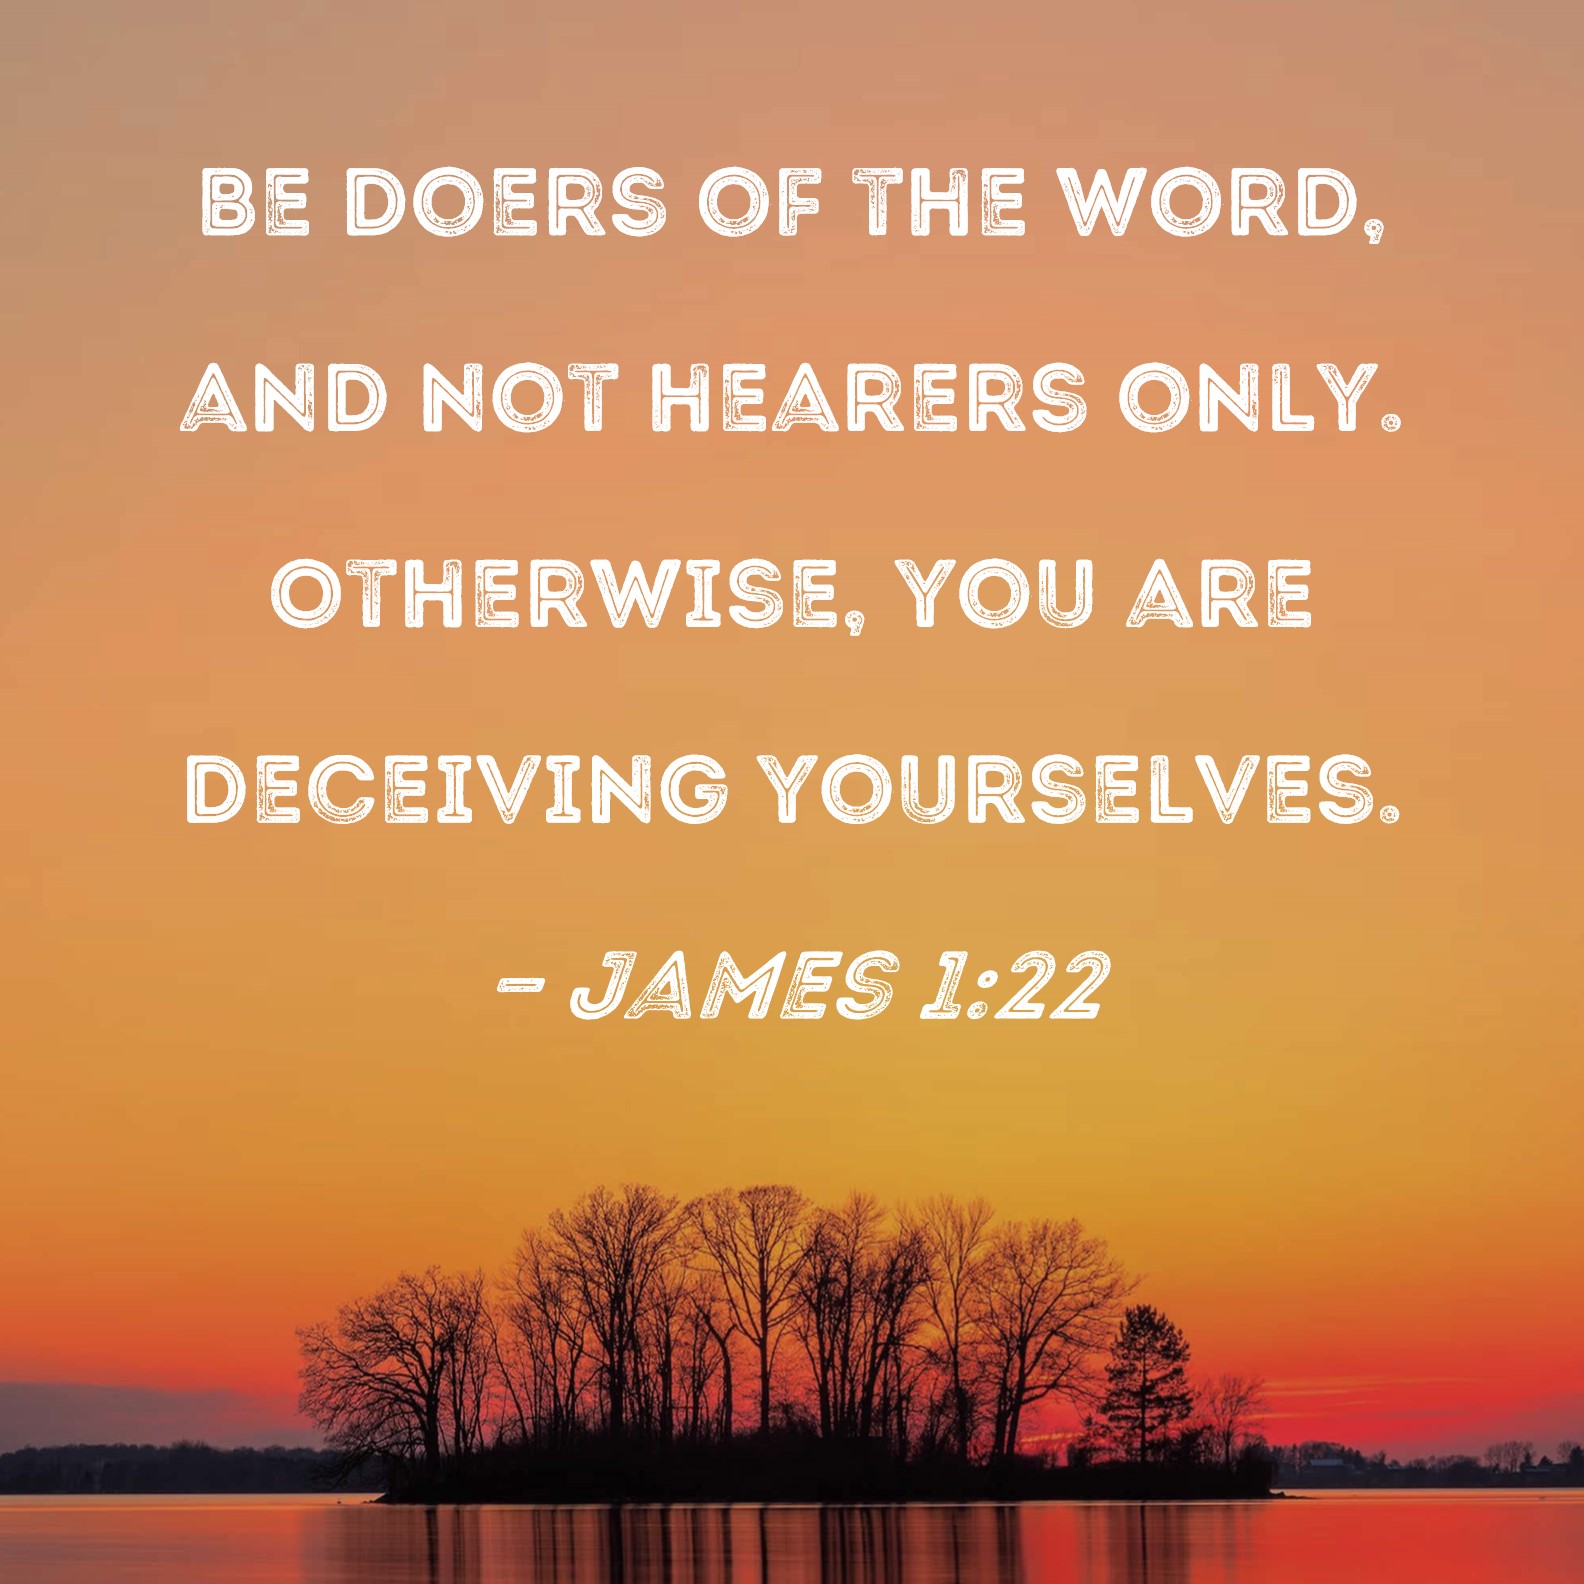 James 1:22-25 Do not merely listen to the word, and so deceive yourselves.  Do what it says. Anyone who listens to the word but does not do what it  says is like